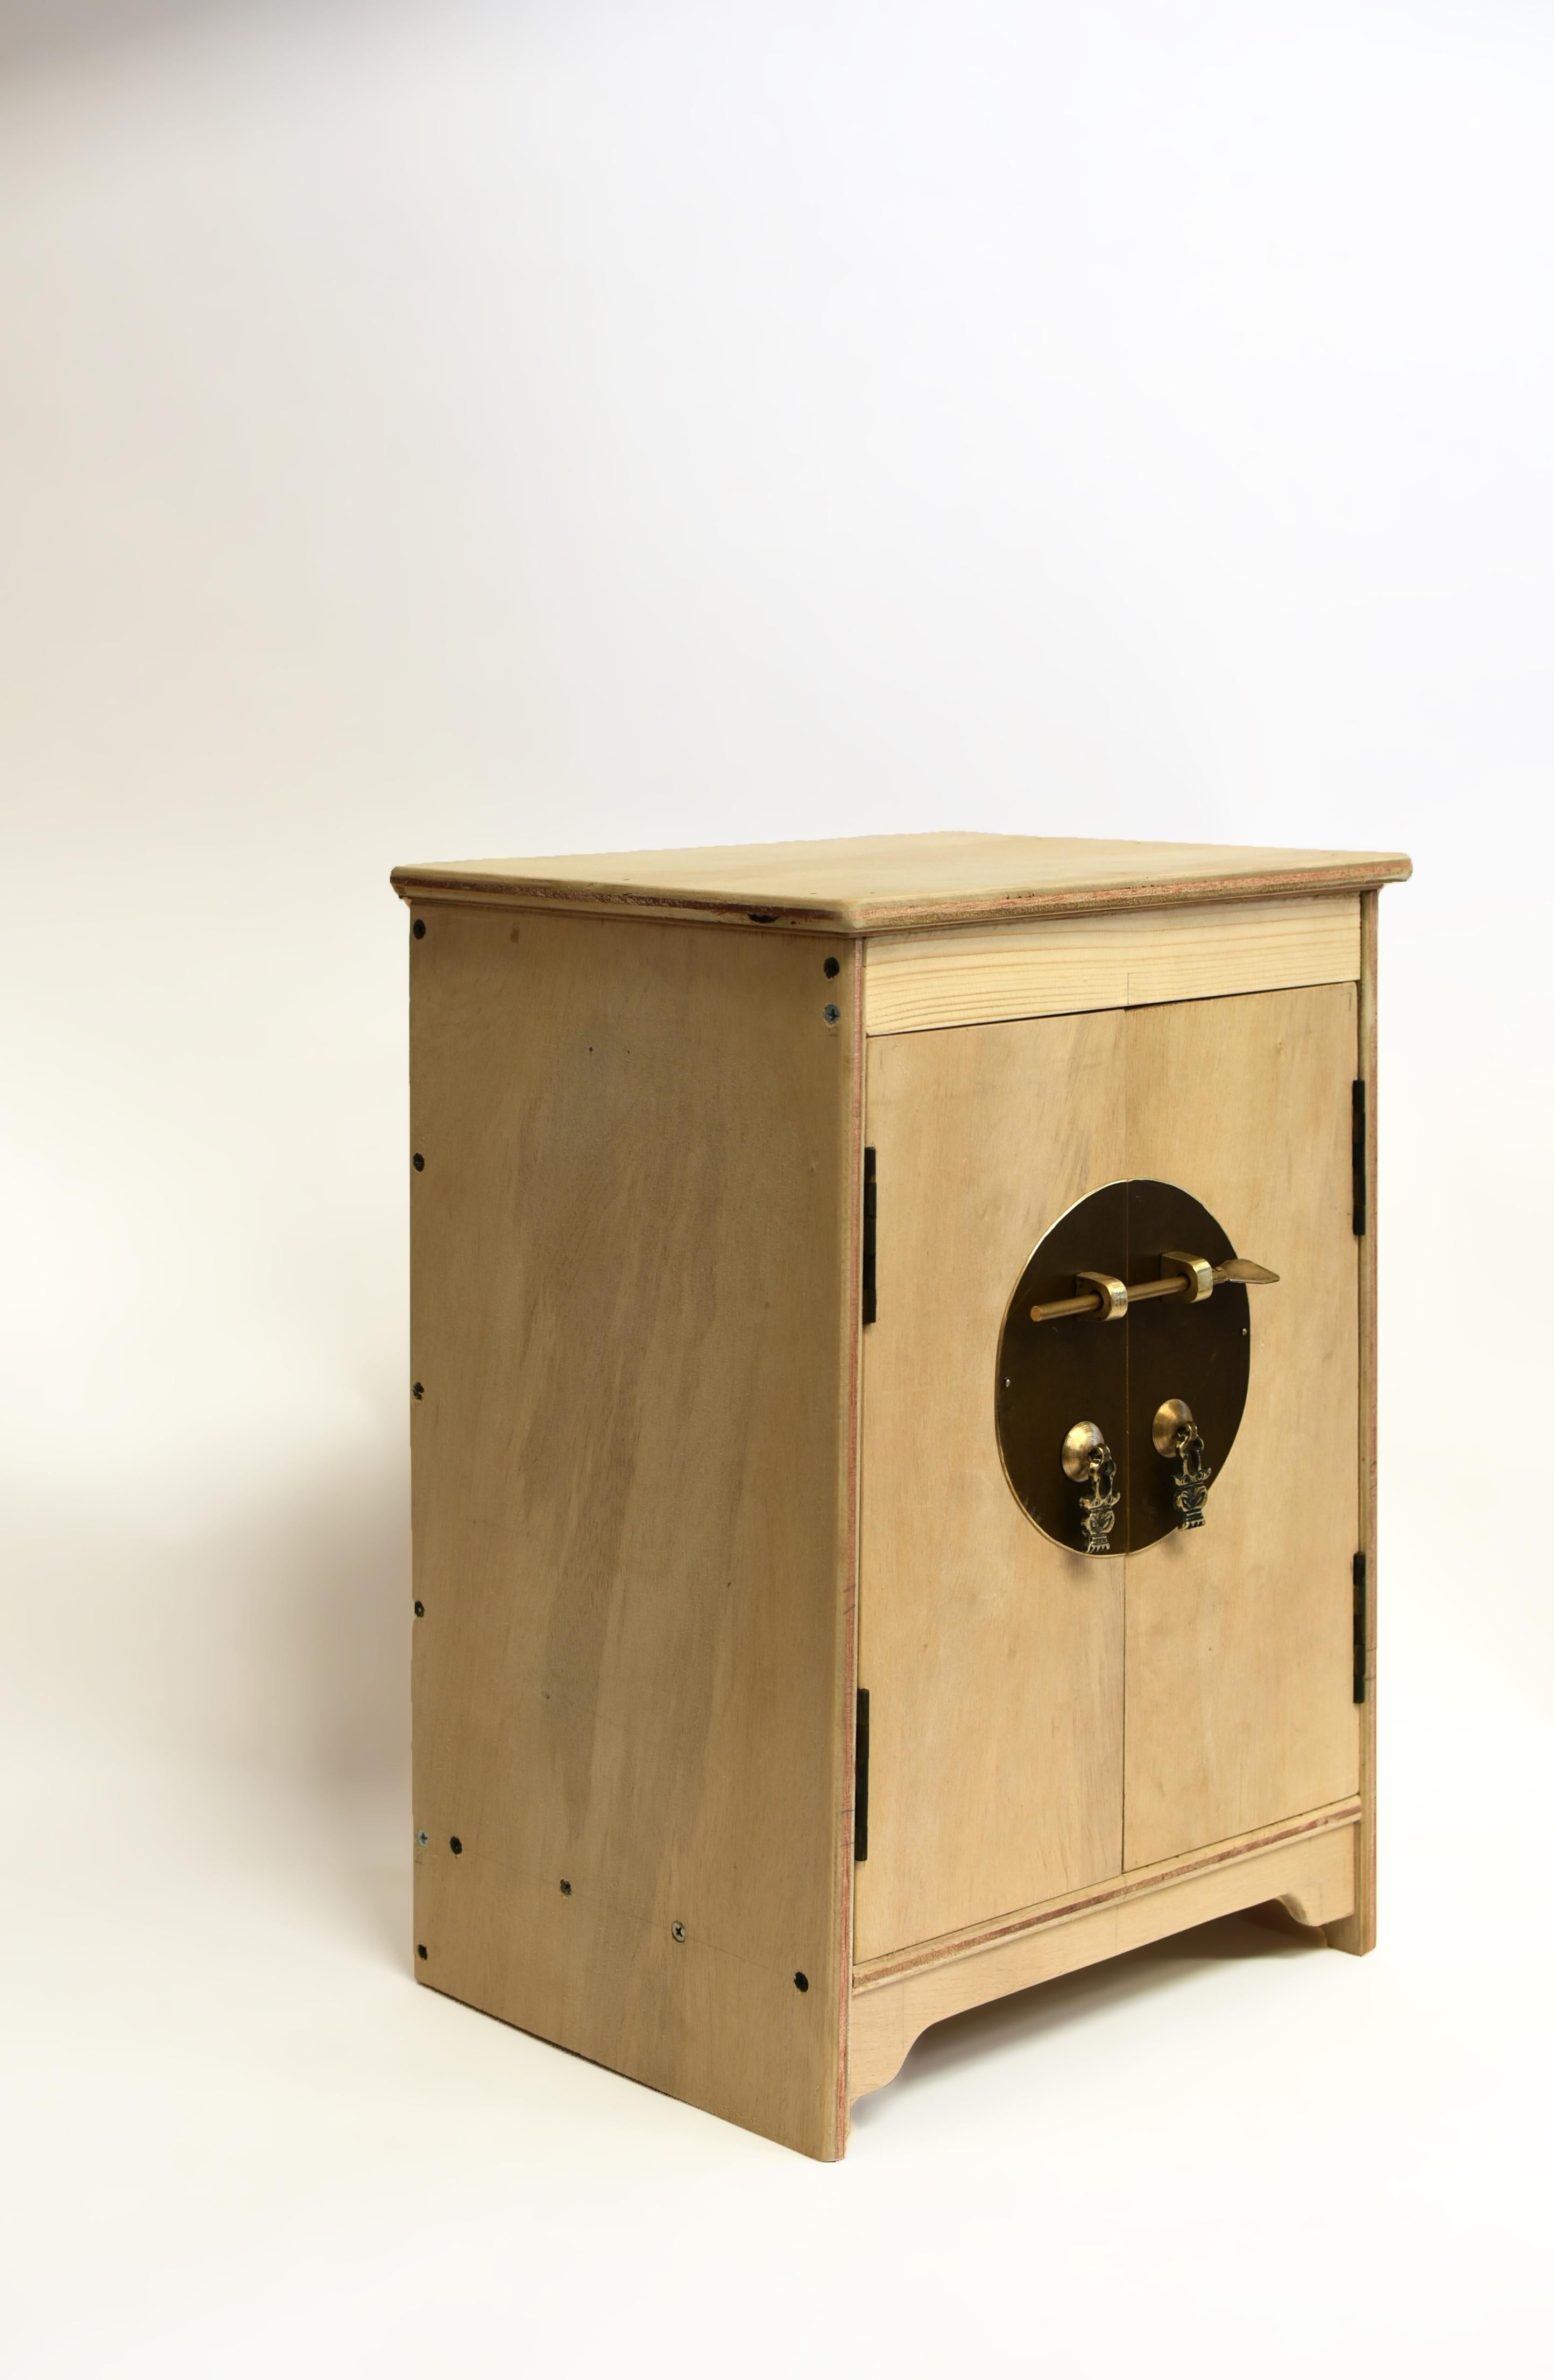 A beautiful, light weight, small cabinet by the Chinese furniture master Zhong. The design based on Ming dynasty round corner cabinets, with doors set between horizontal stretchers under a single panel top with rounded corners. An elegant apron sits